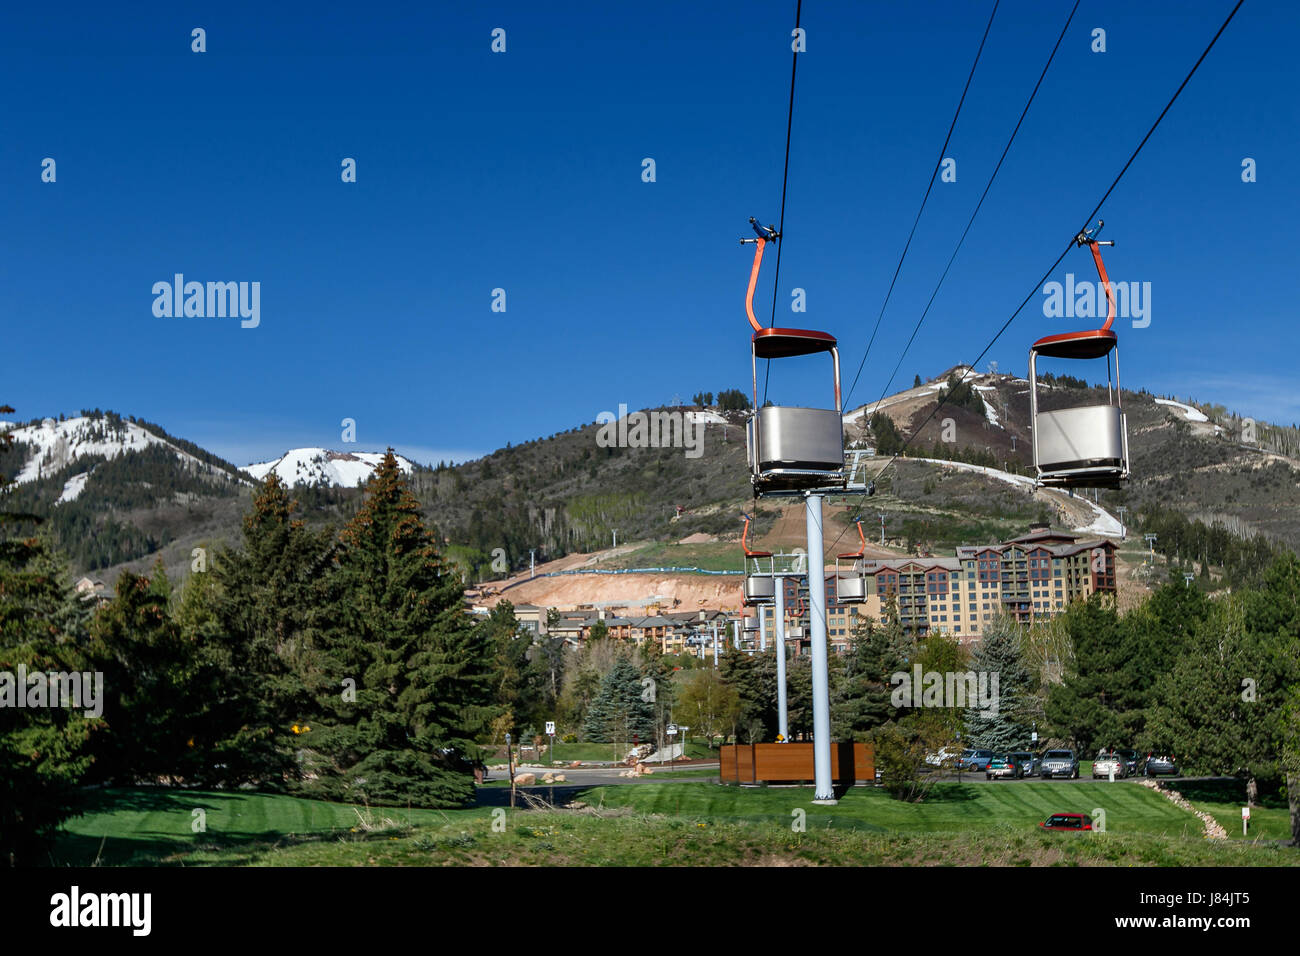 Cable lift with its cabins in a ski resort. Stock Photo